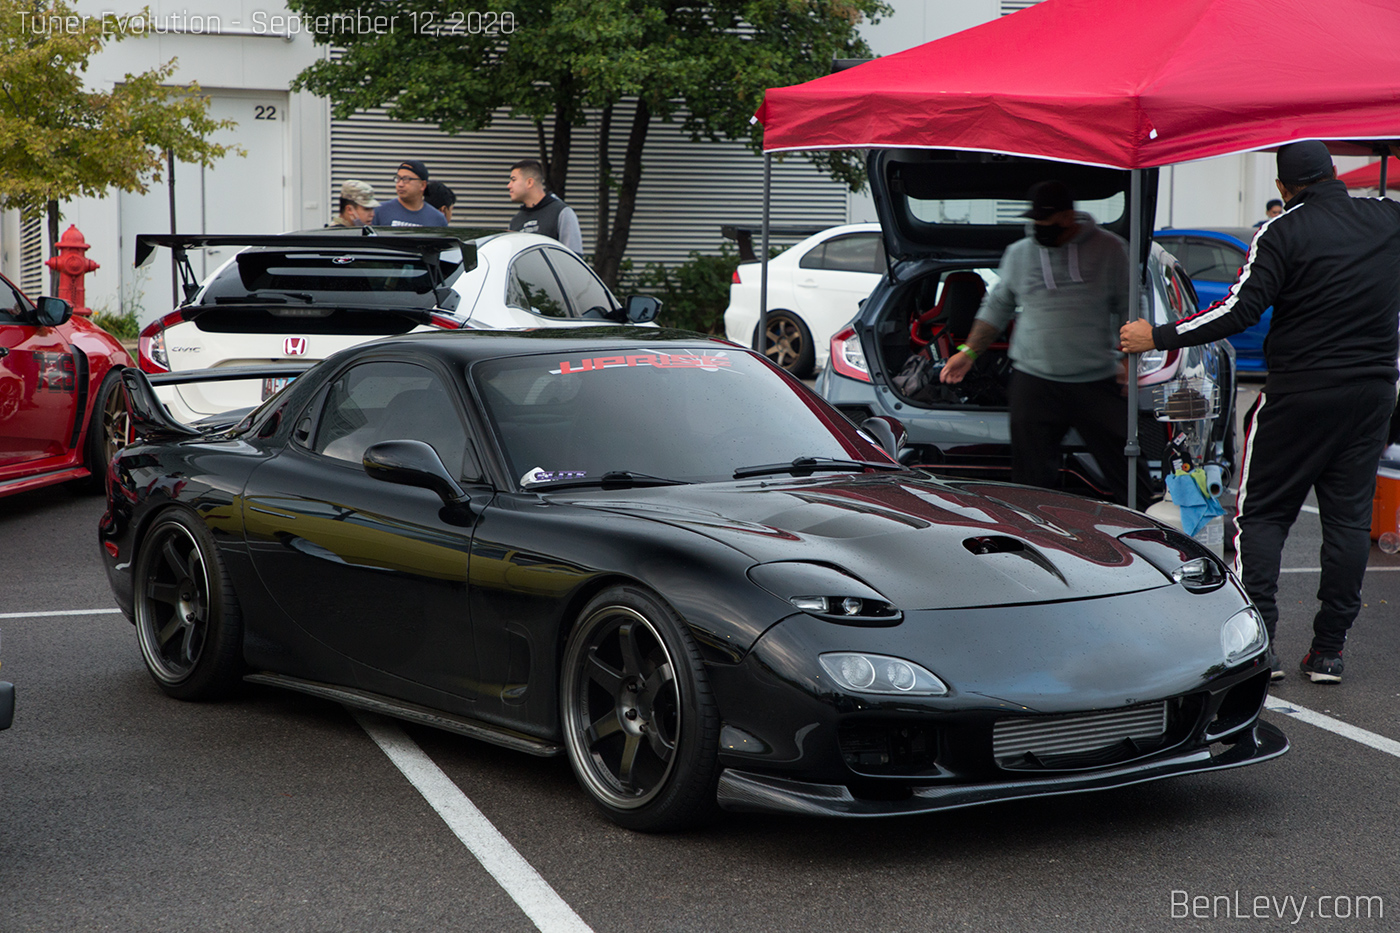 Mike's FD RX-7 at Tuner Evolution Chicago